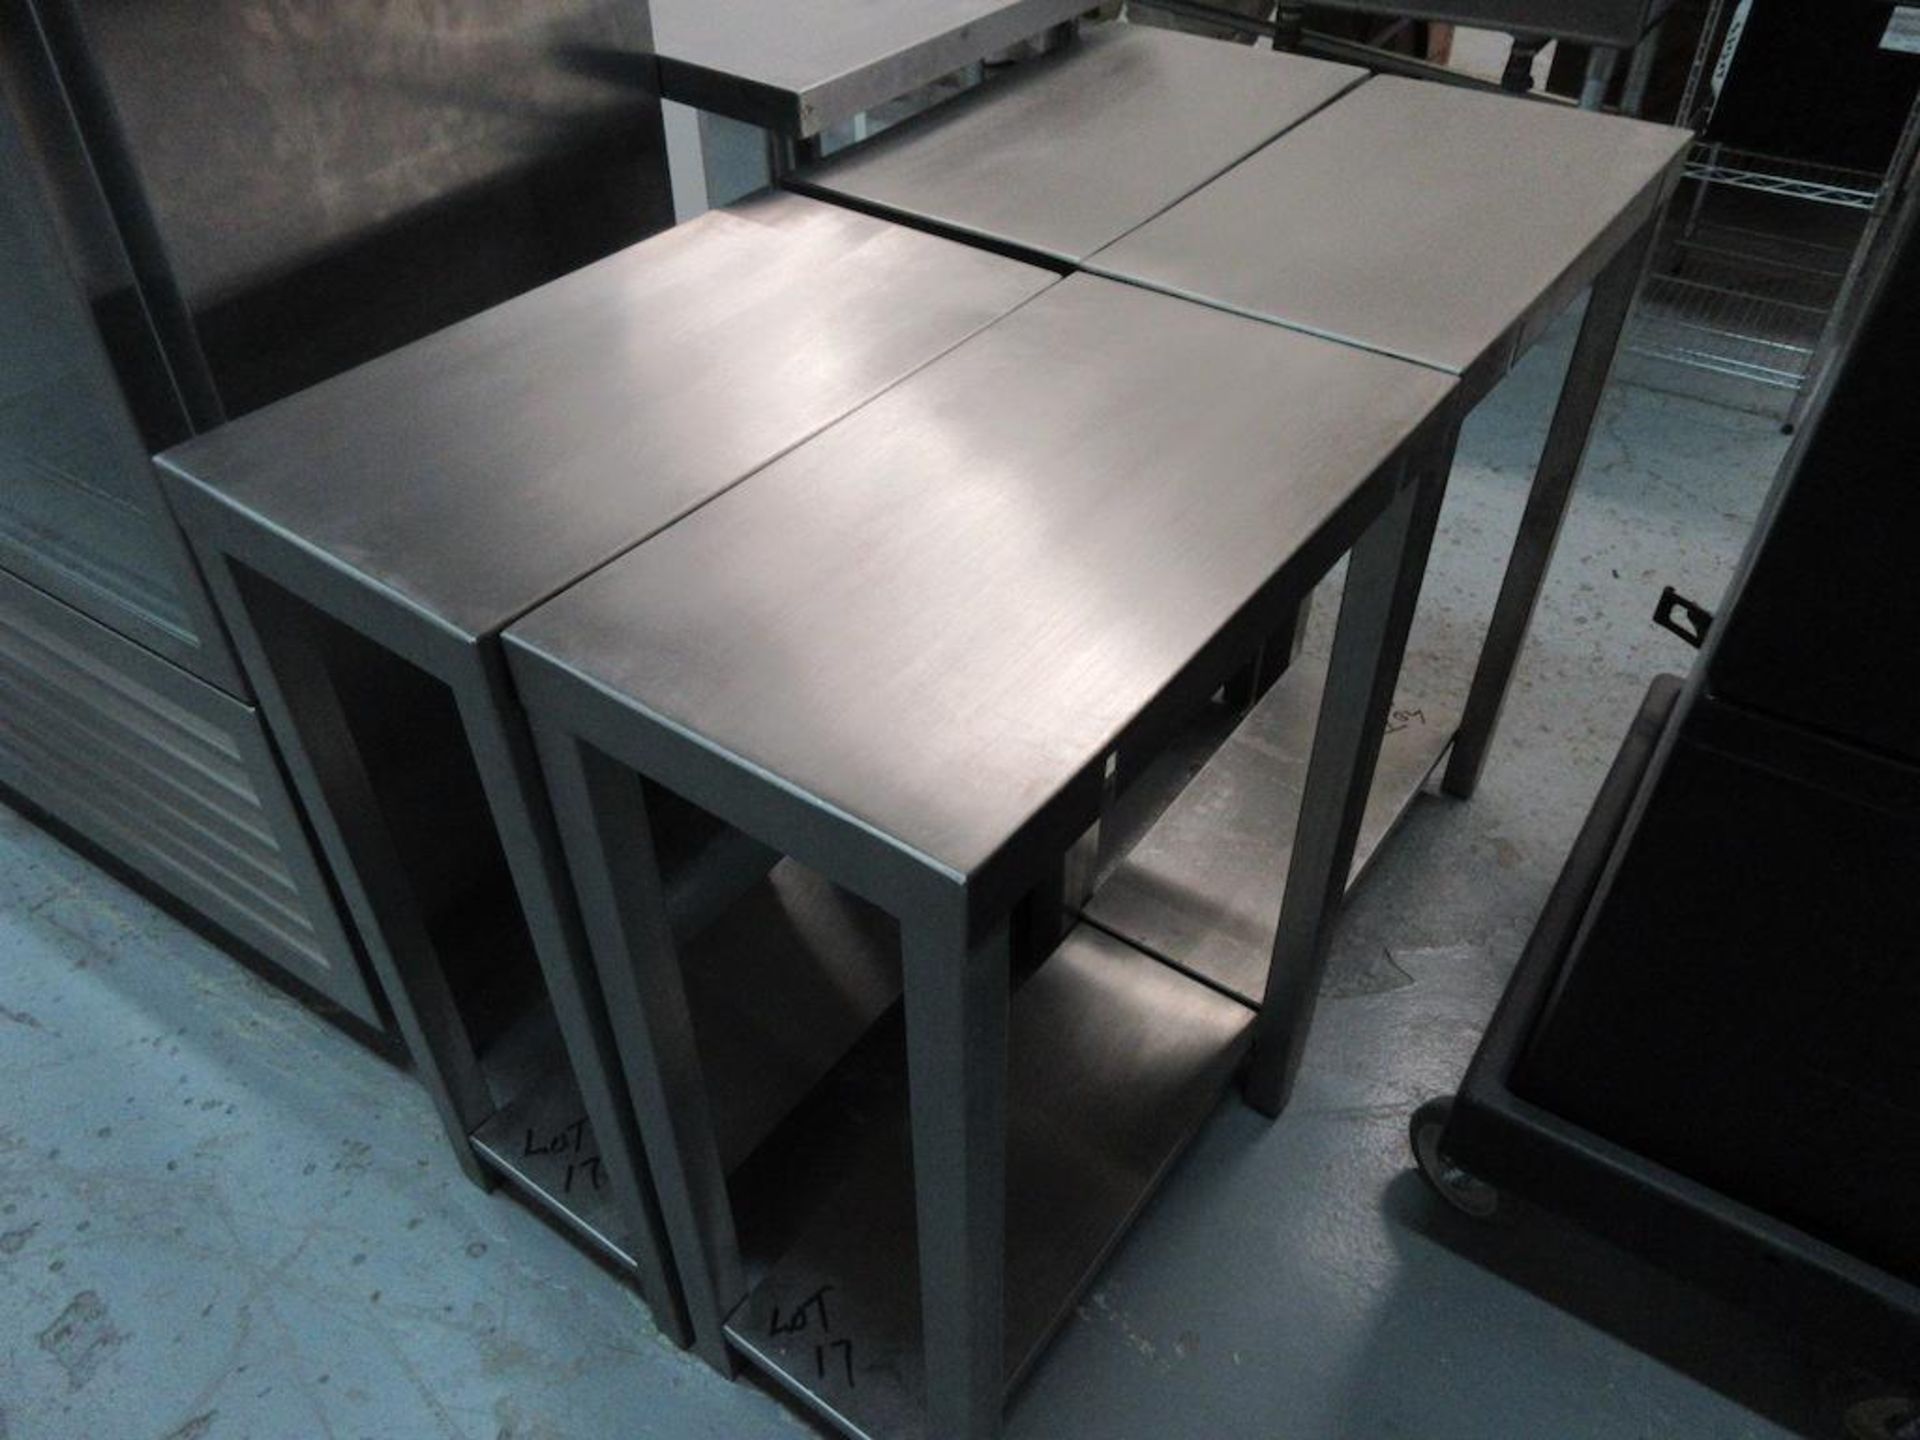 Lot 5 stainless steel prep tables: 24"x24" portable, (4) 12"x22" stationary - Image 4 of 4